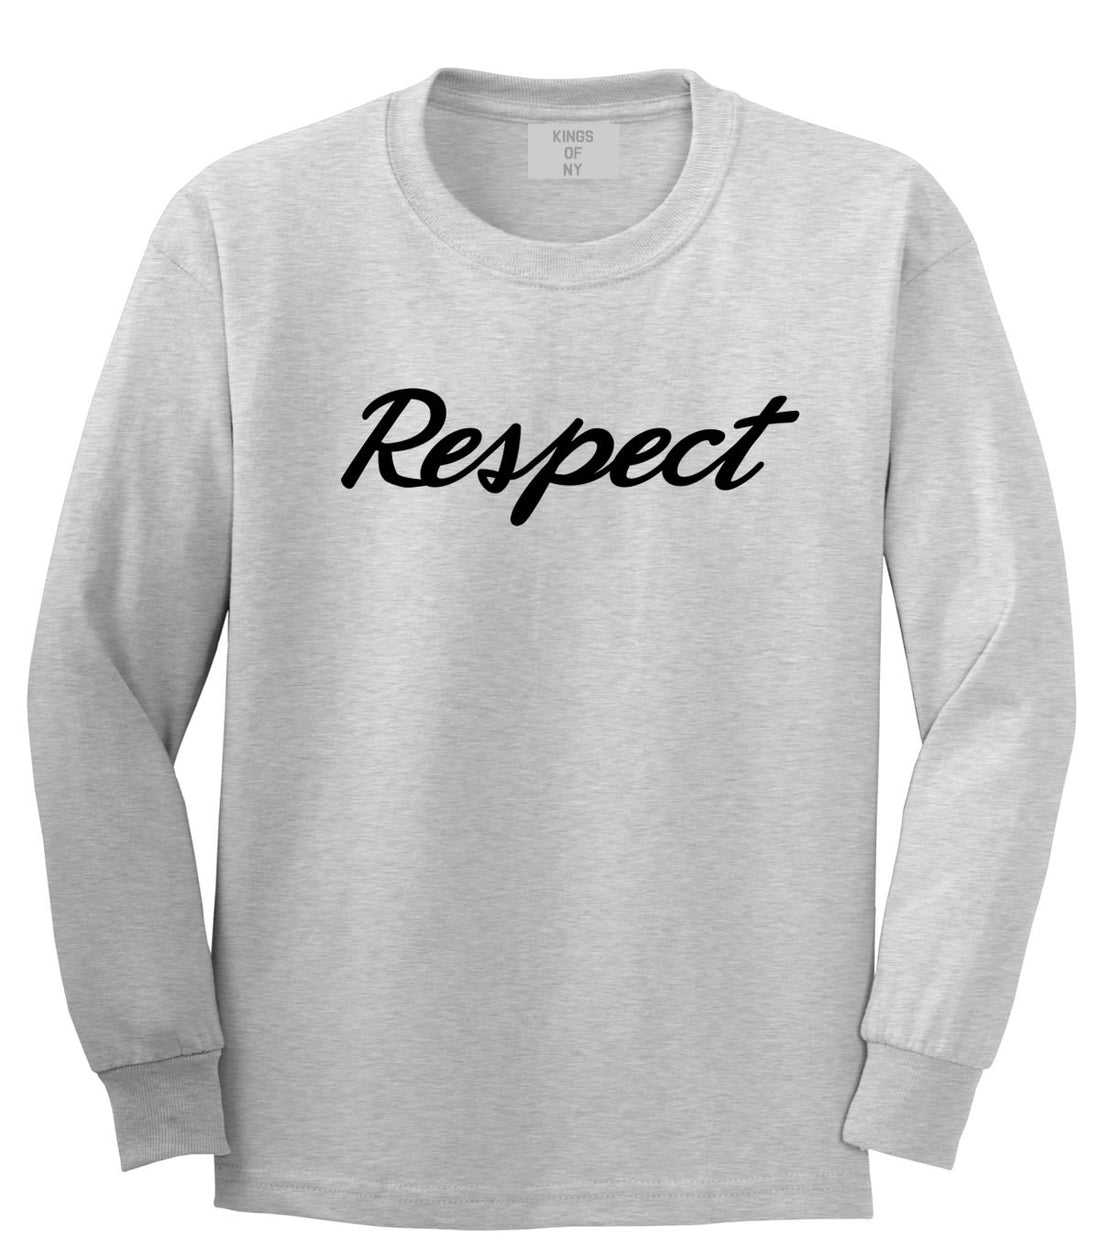 Kings Of NY Respect Long Sleeve T-Shirt in Grey